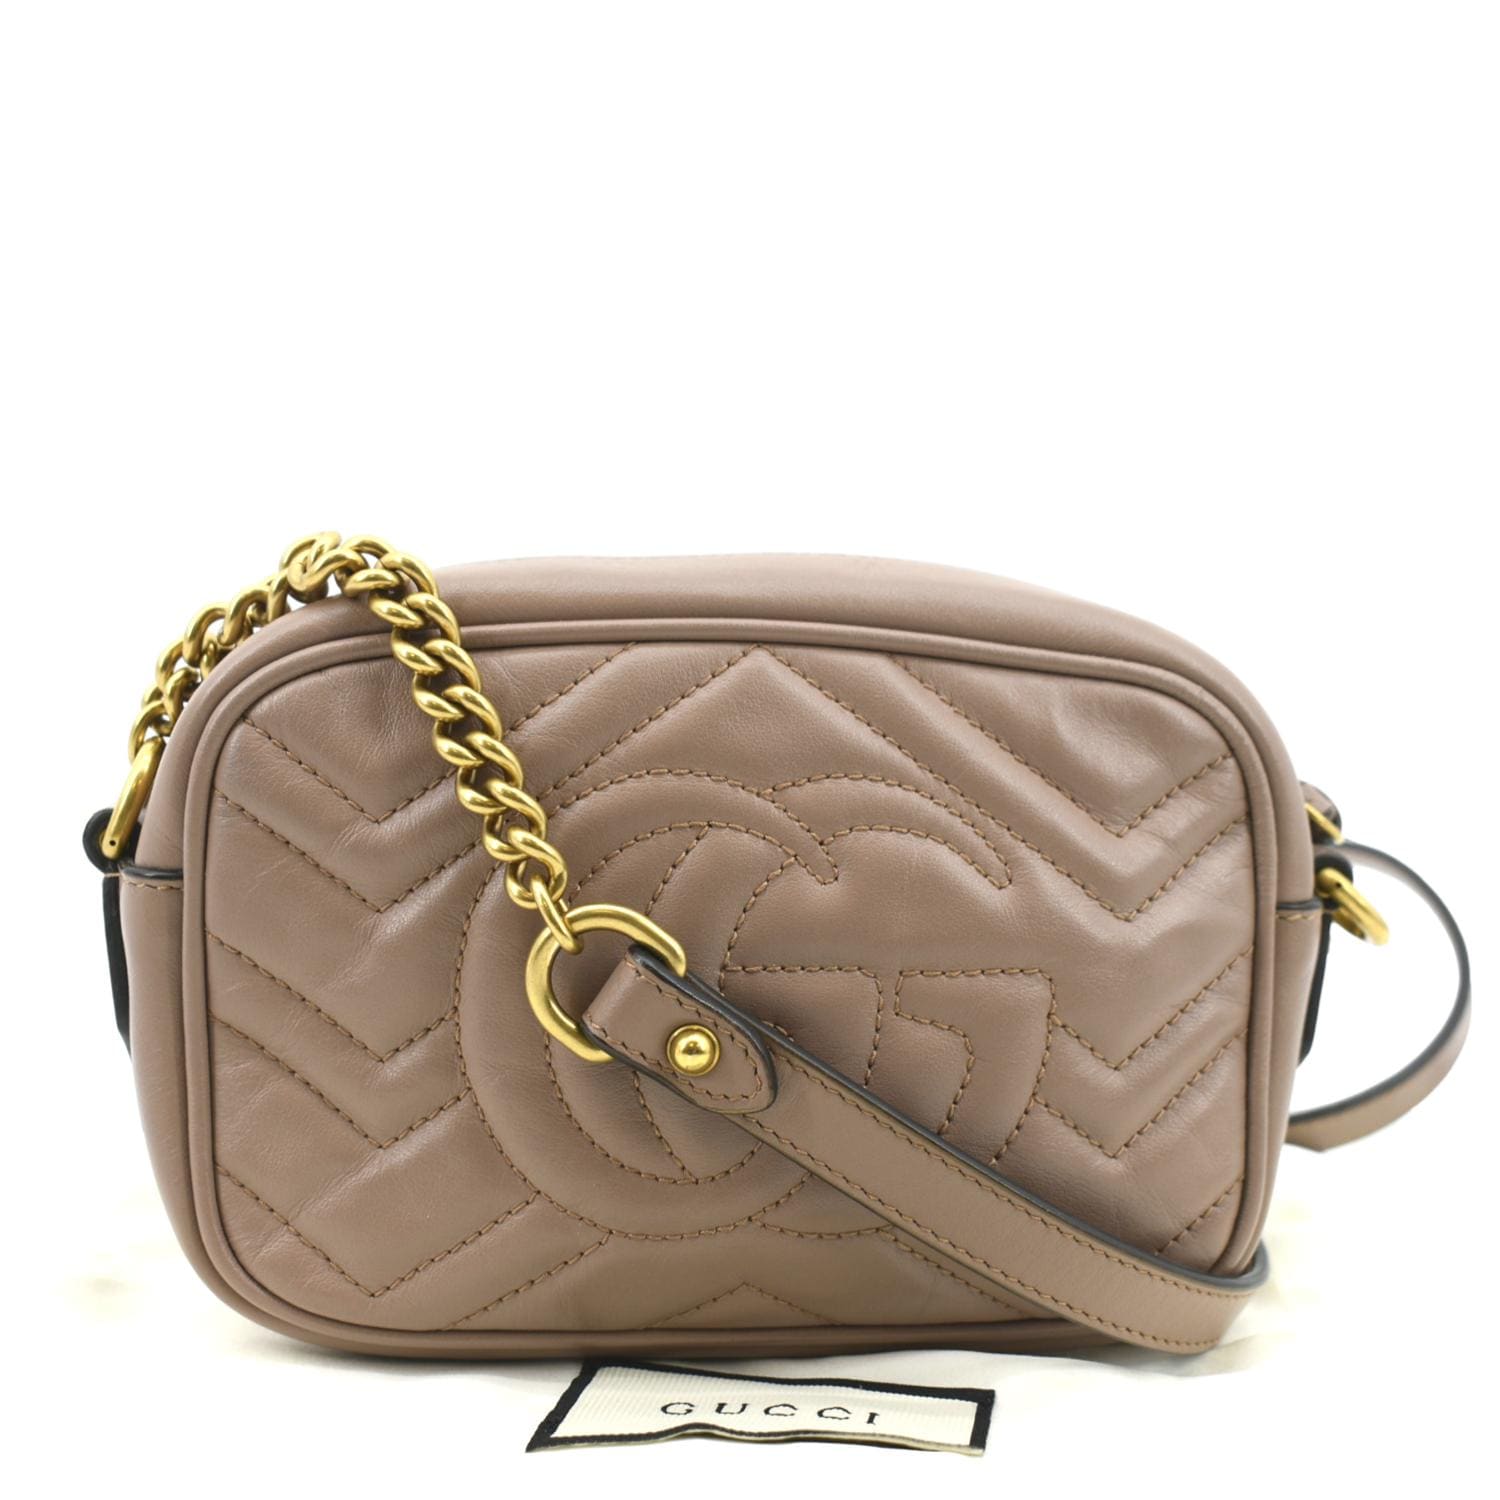 GG Marmont mini quilted leather pouch